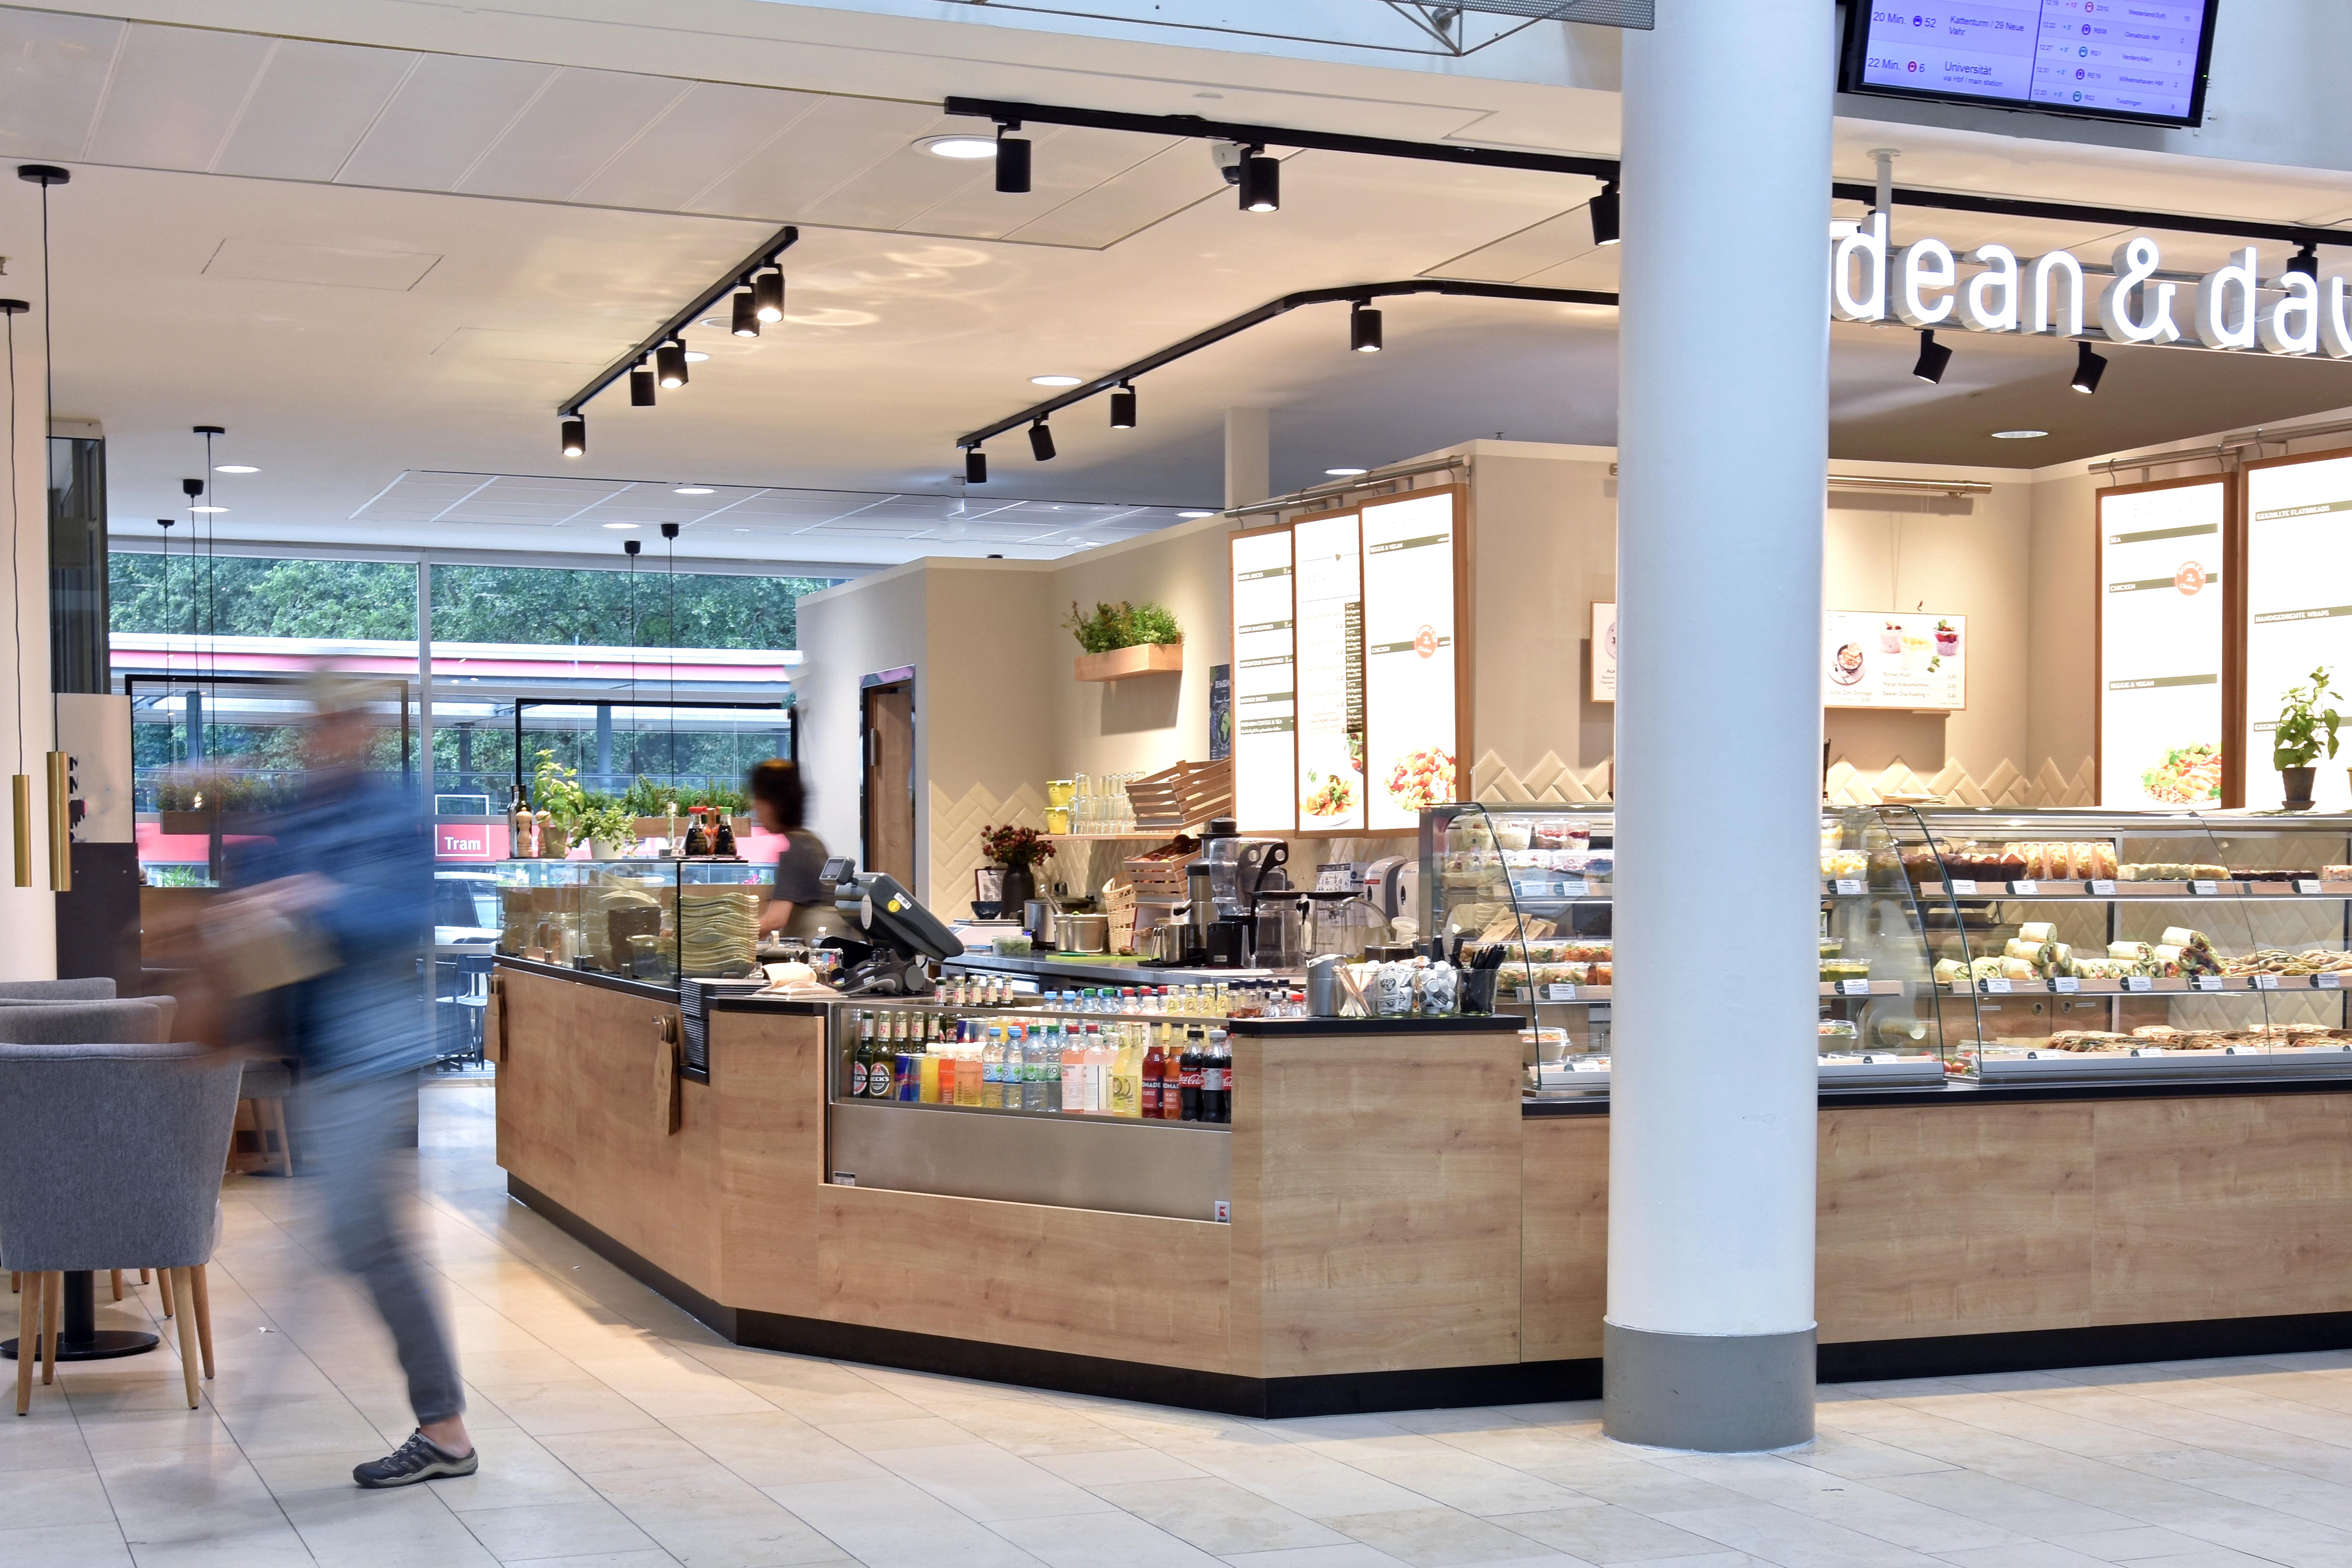 SSP attracts local and international customers with new dean&david store at Bremen Airport